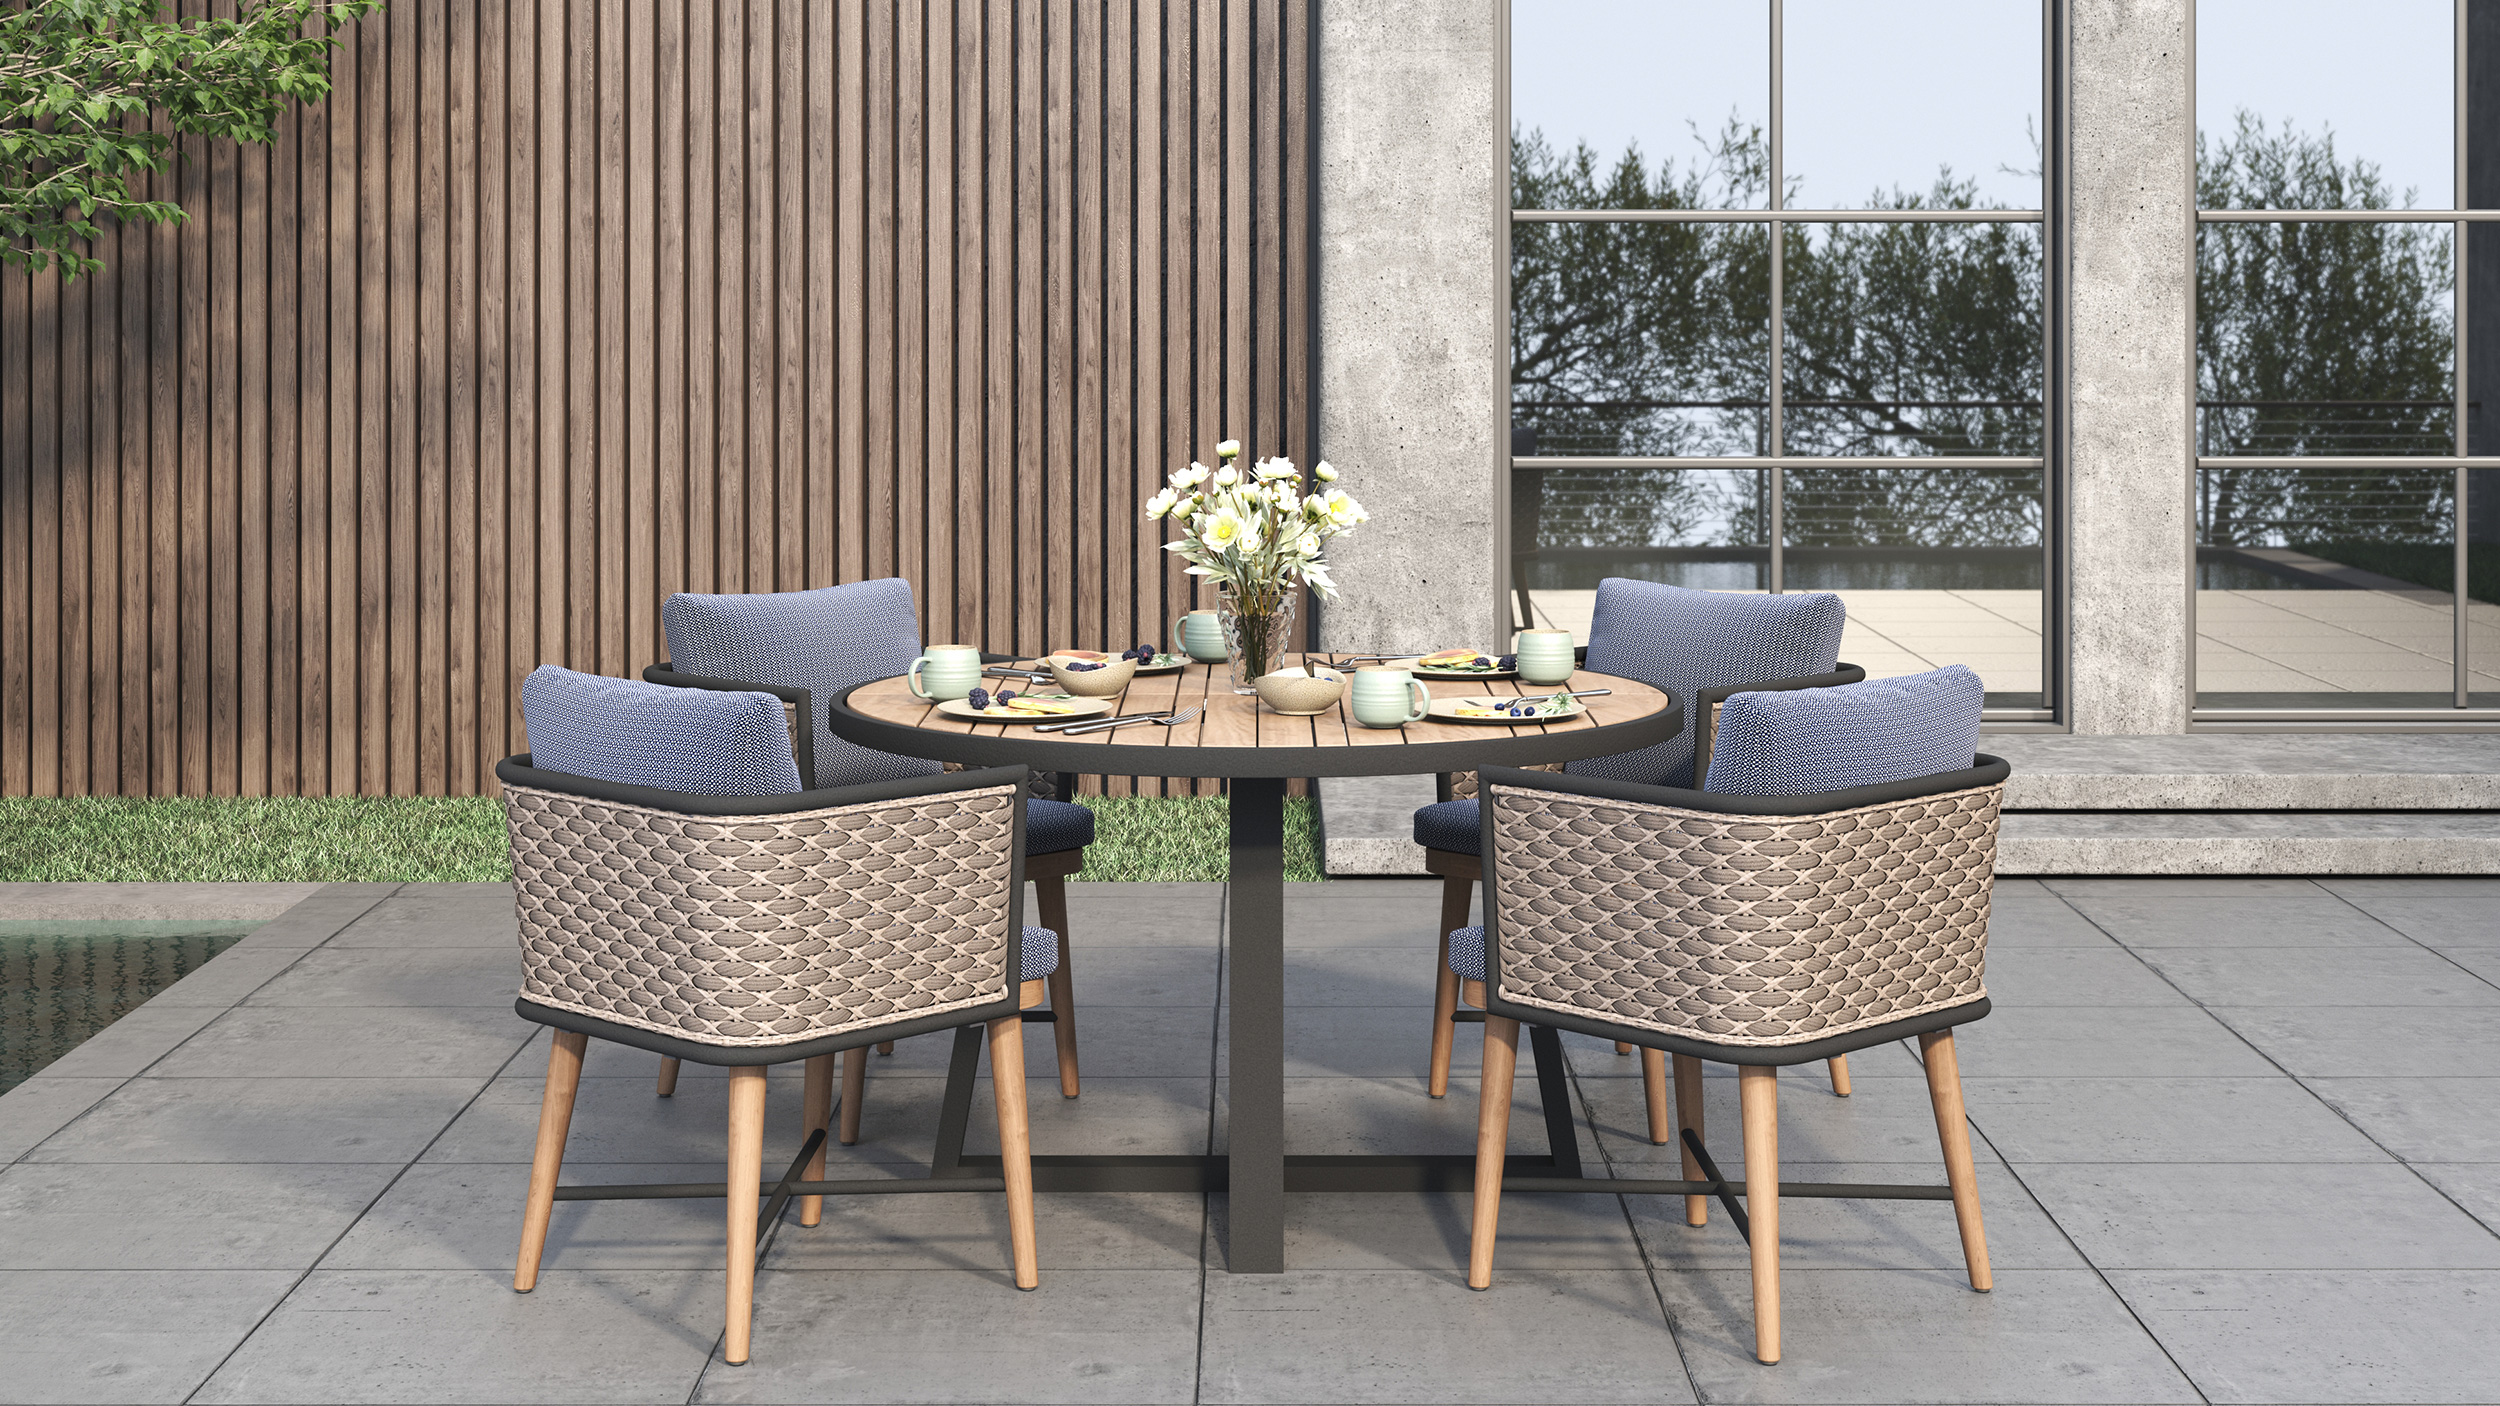 Corda Dining Armchairs Fontelina Blue Side View With Jardin Round Dining Tables 125.Effectsresult